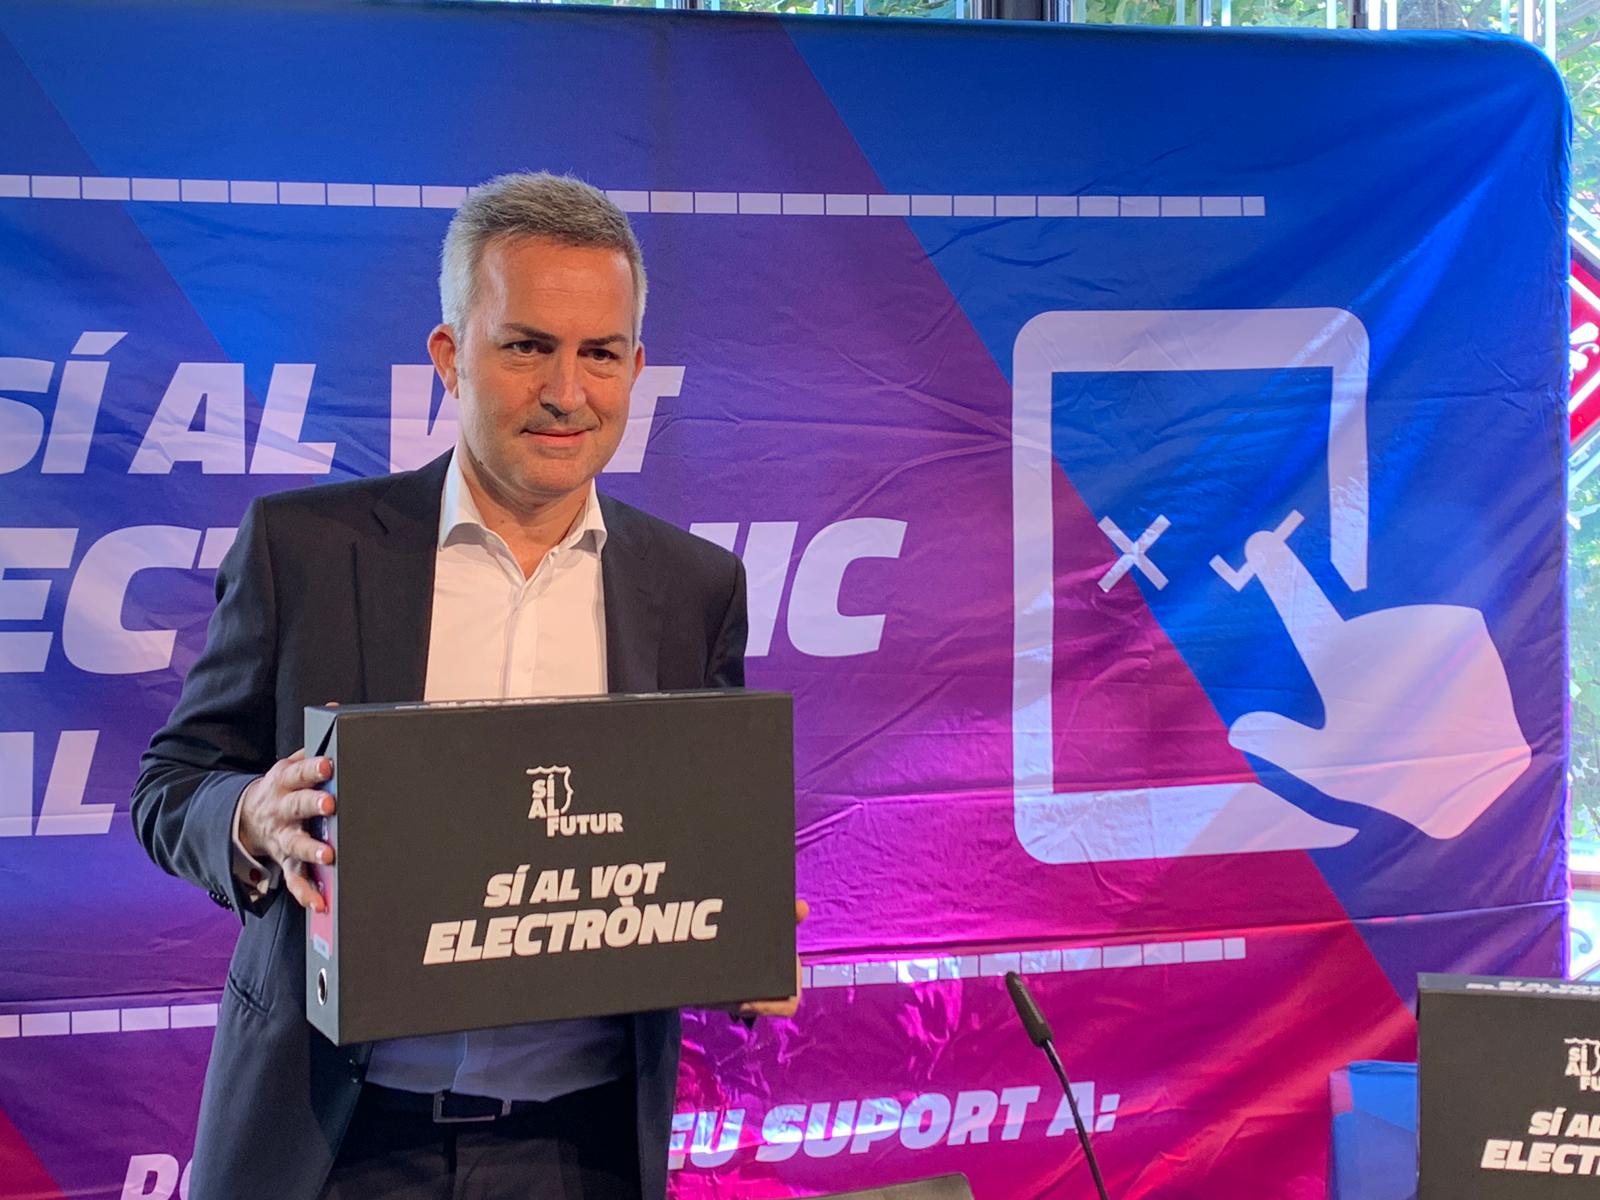 4.989 Barça members lend their support to the initiative for the October Delegates’ Assembly with a view to approving the use of electronic vote in the Club